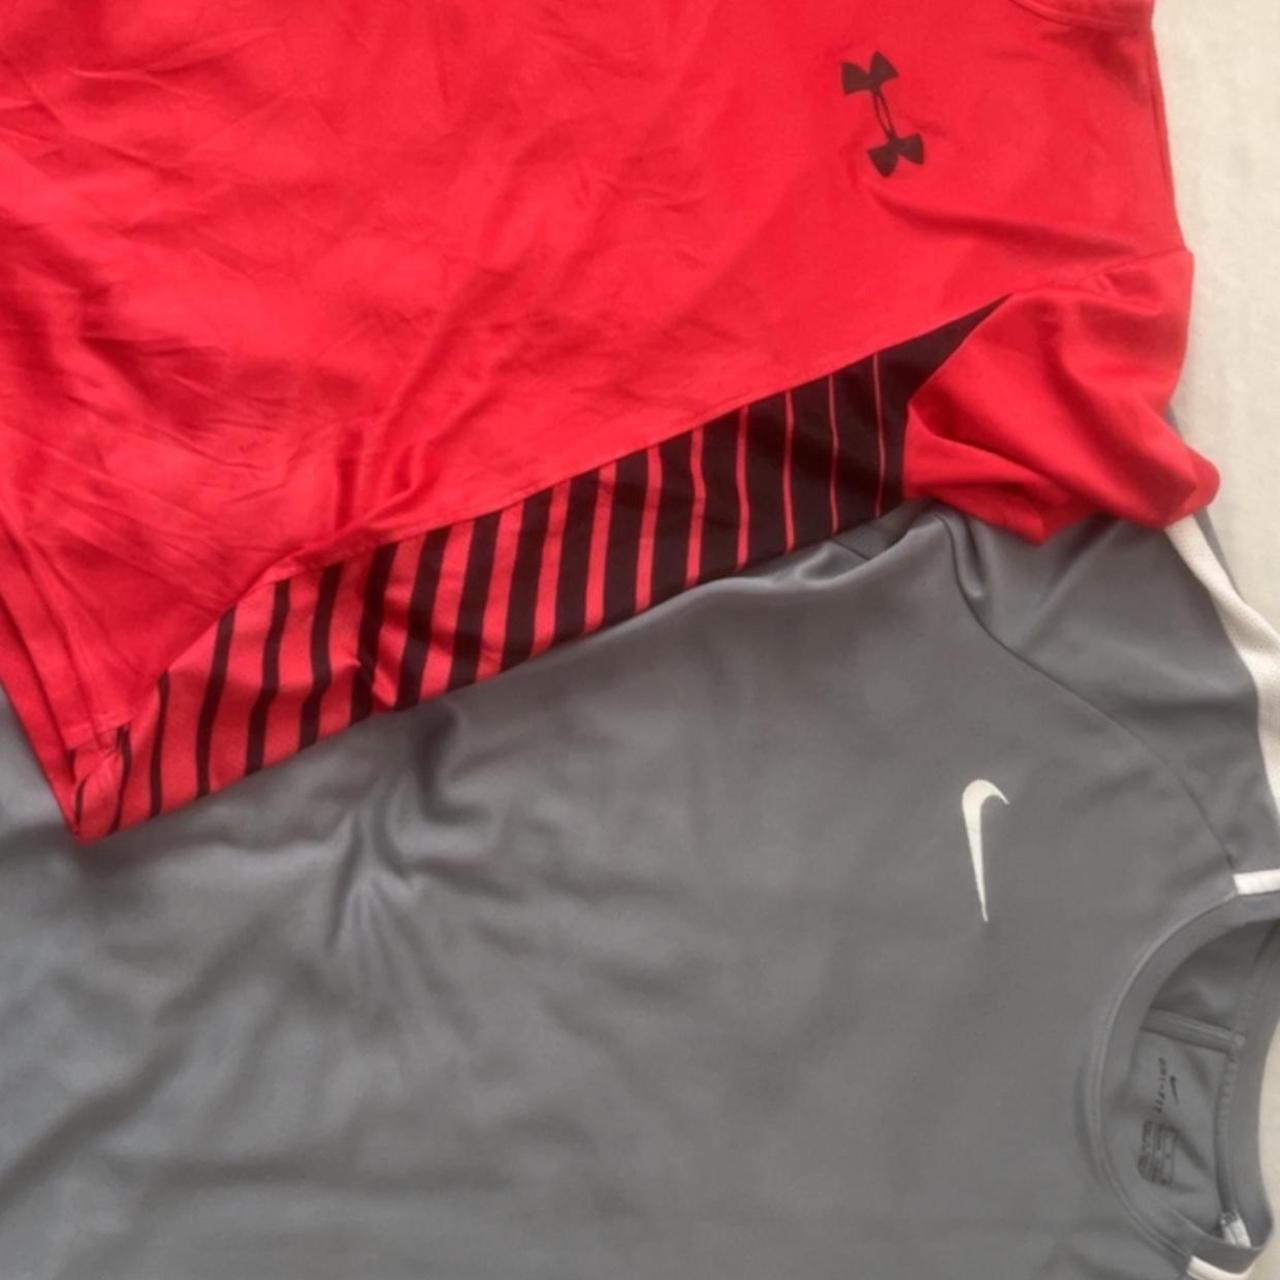 Under Armour Bright Red Under Armour Dri Fit Shirt | REFASH